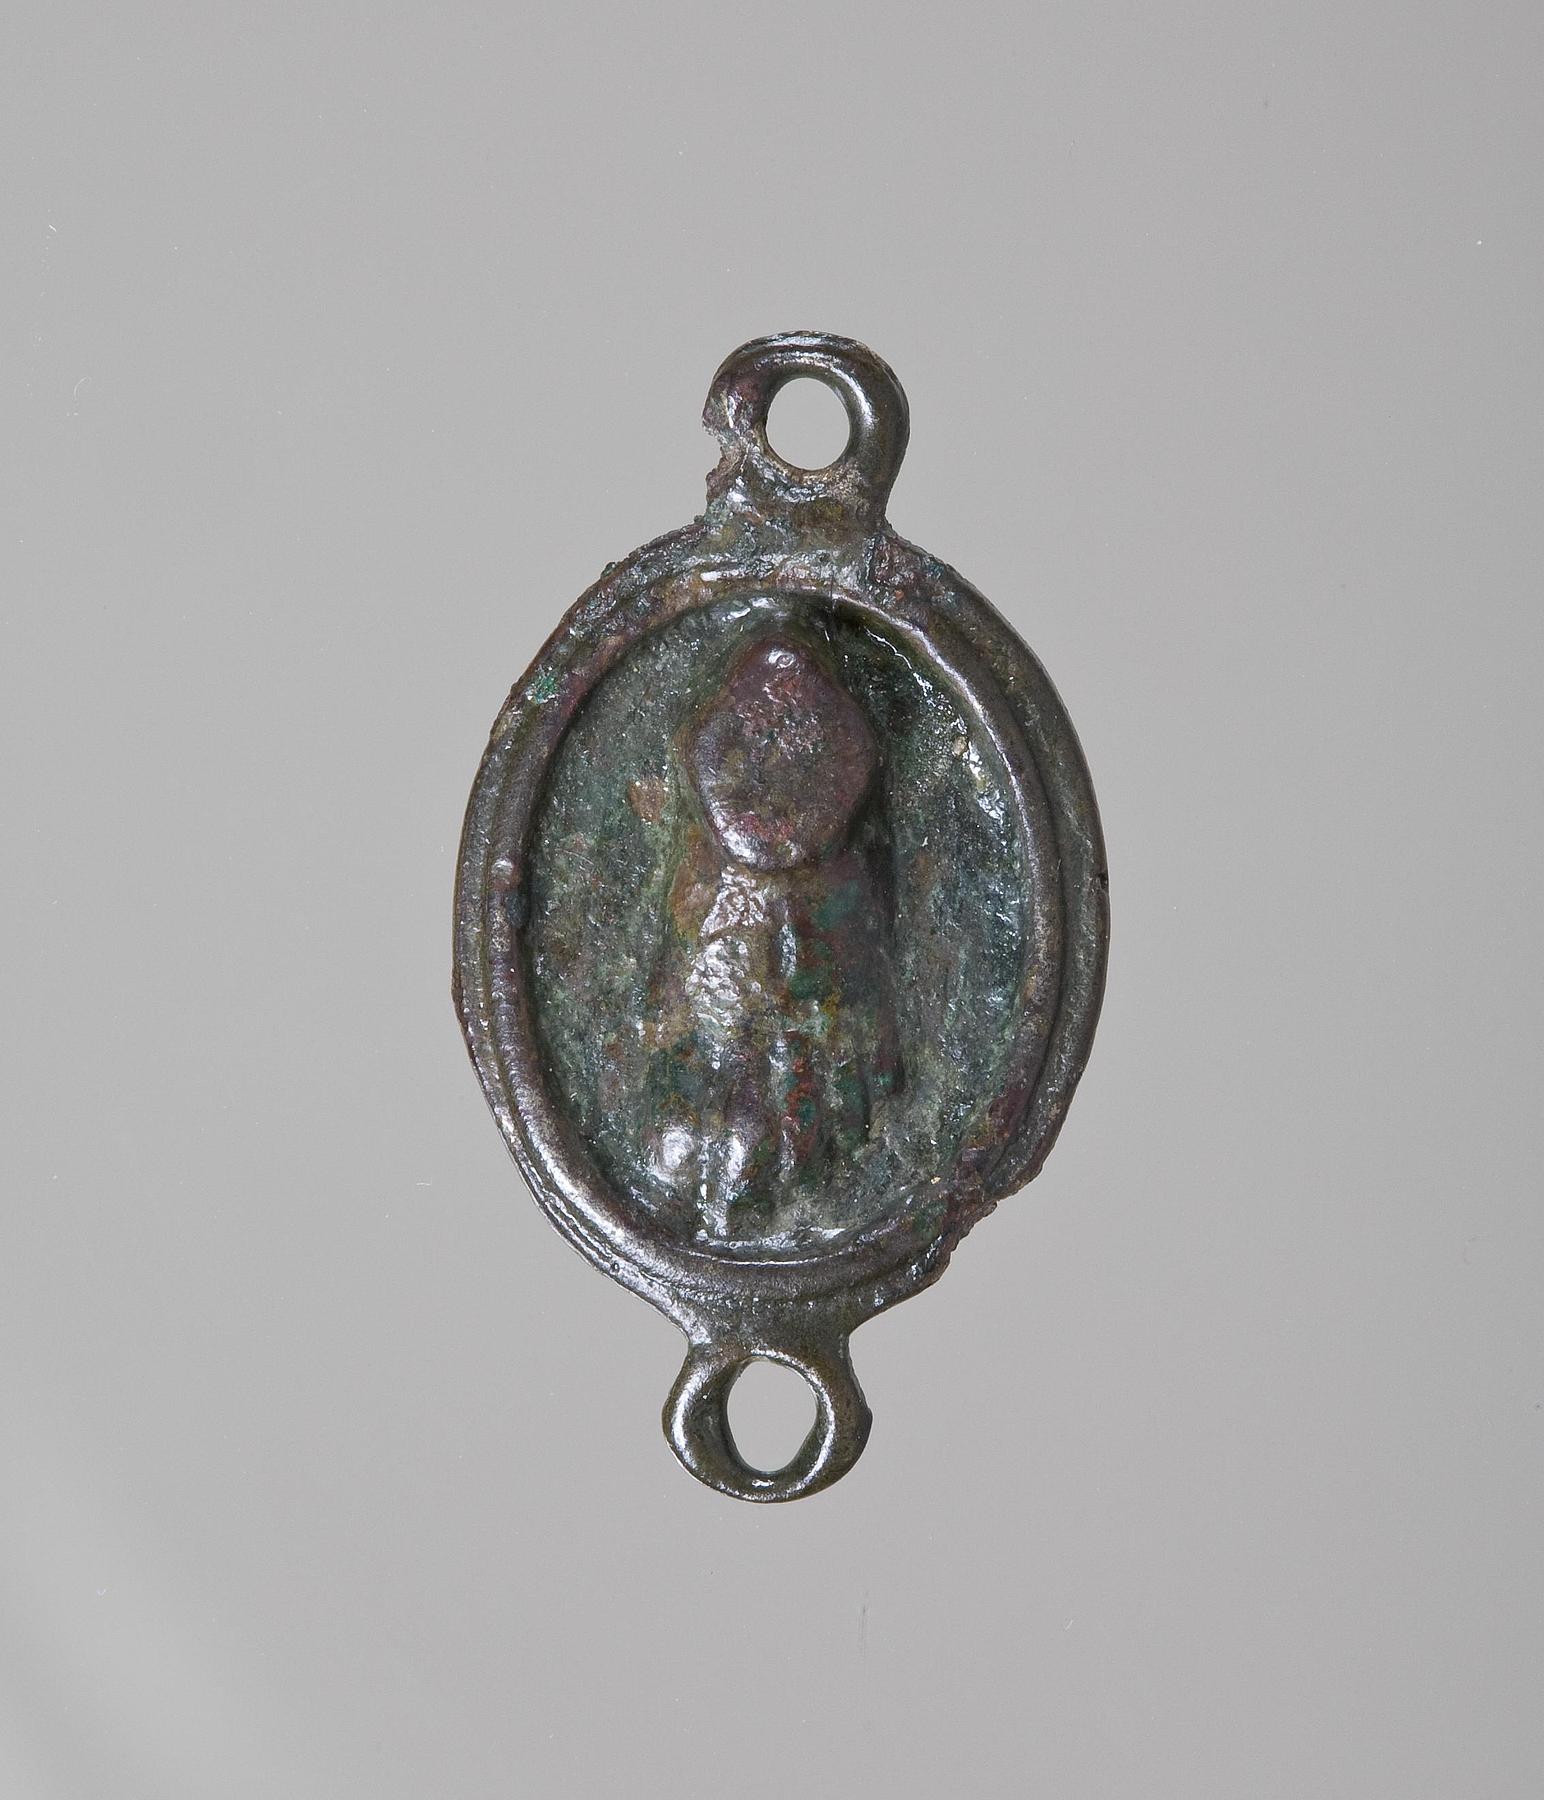 Amulet with a left foot, H2221